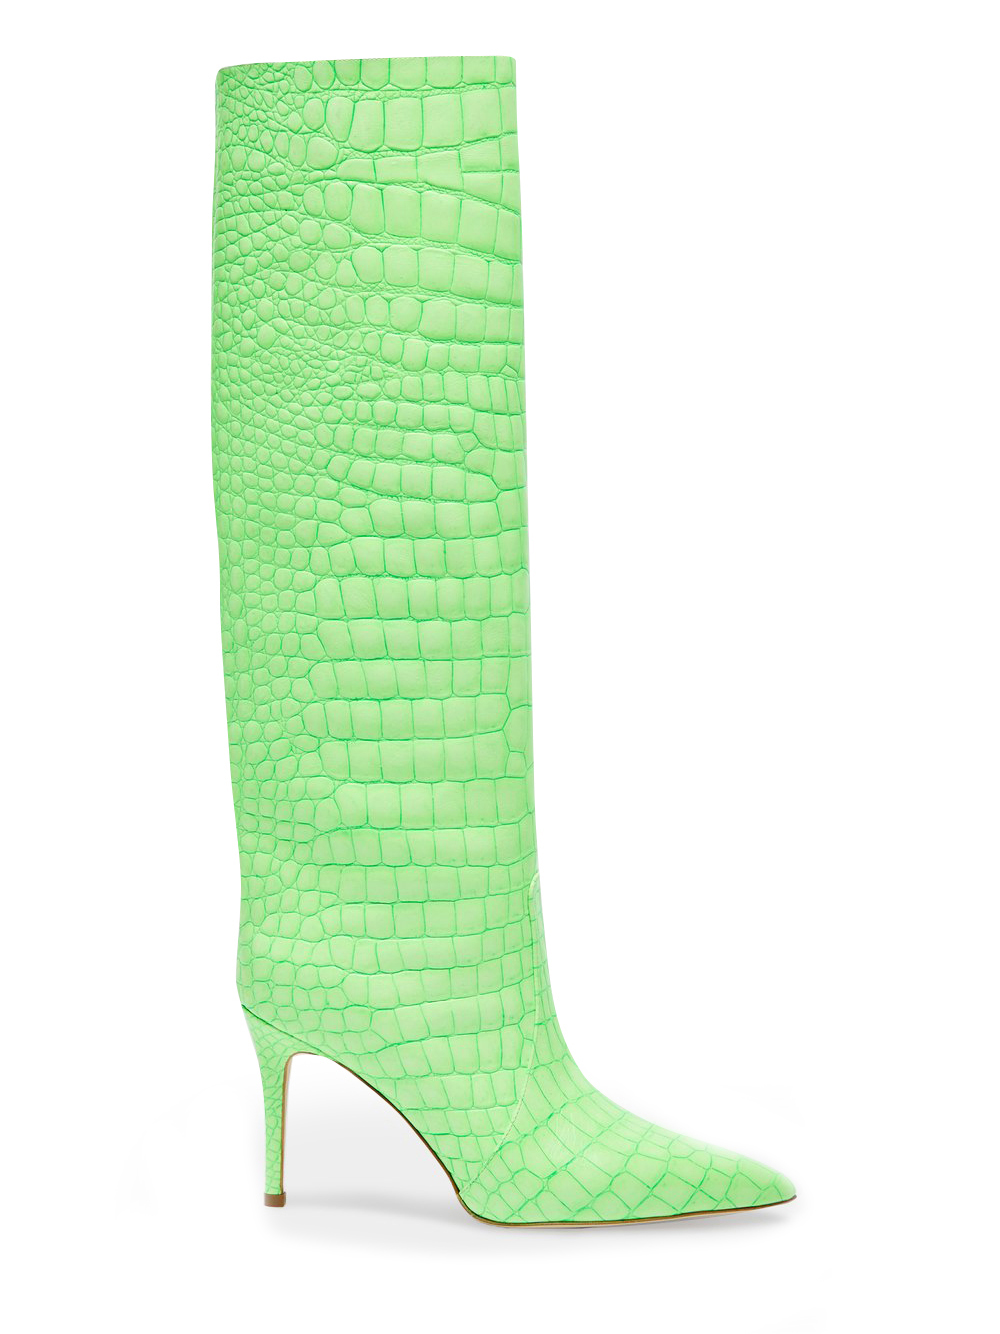 Boots with crocodile look in green